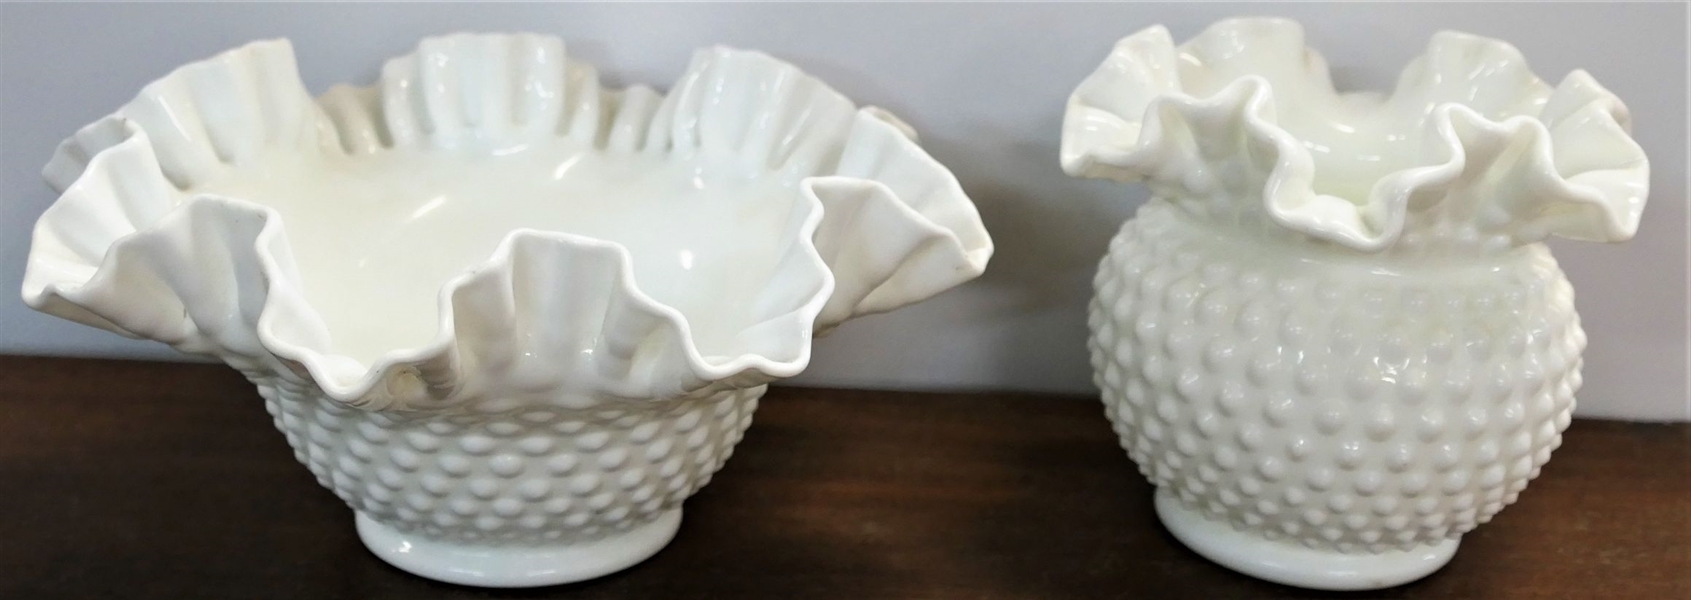 2 Hobnail Milk Glass Pieces - Largest Bowl 4 1/2" tall 9 1/2" Across